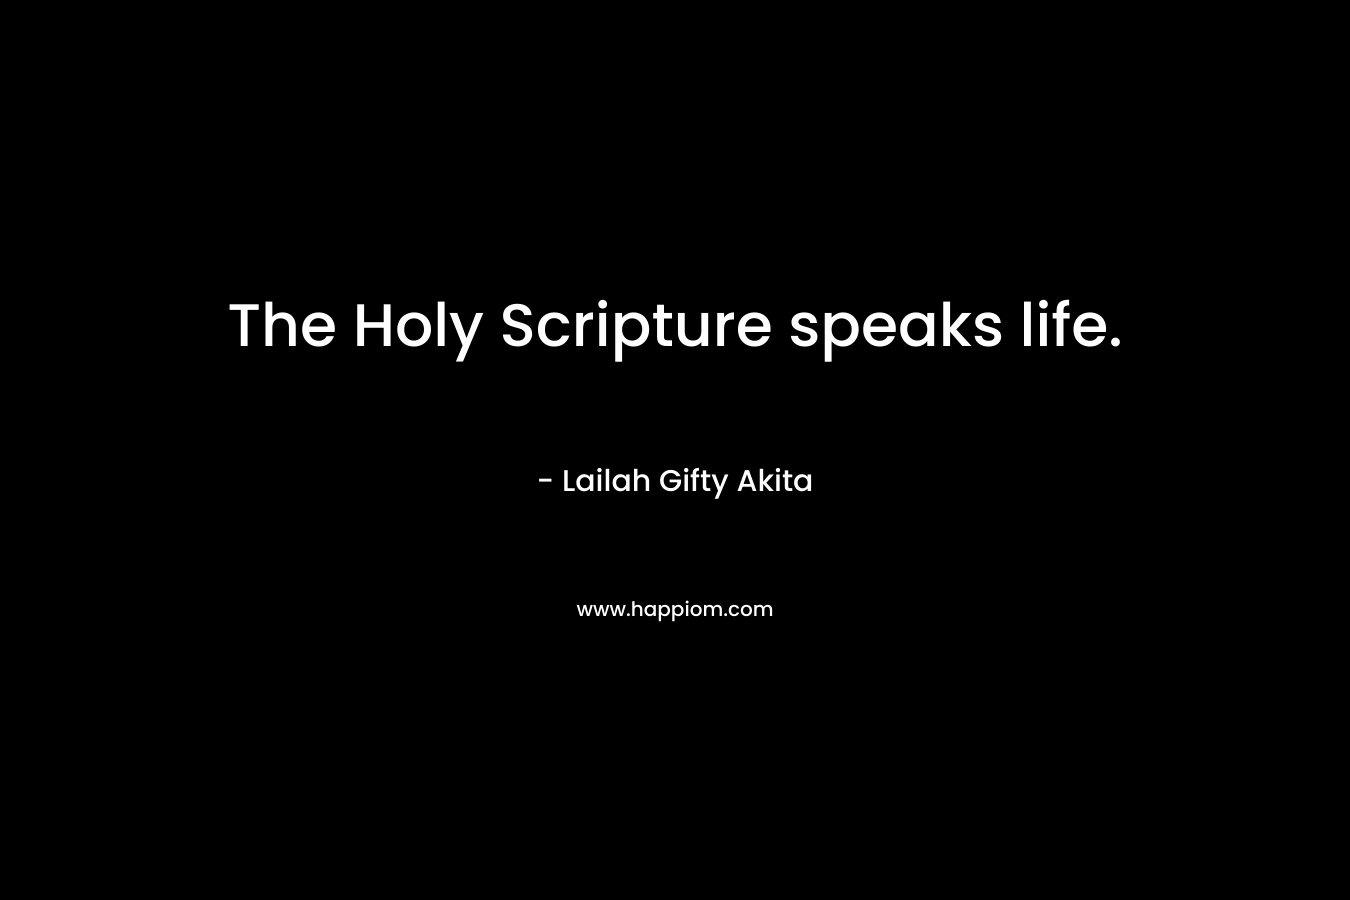 The Holy Scripture speaks life.